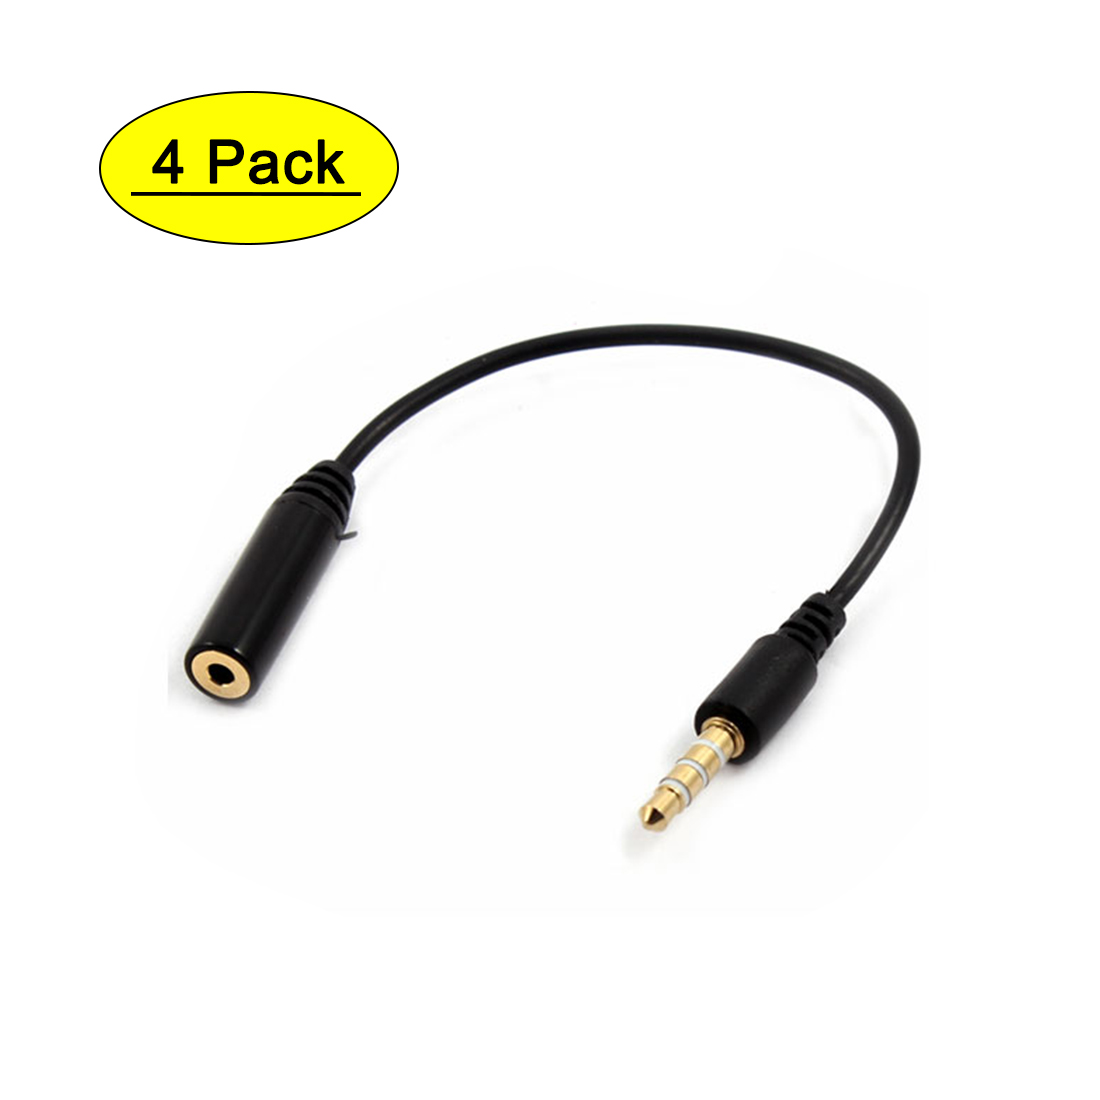 2Pcs 3.5Mm Male To 2.5Mm Female Stereo Audio Mic Plug Adapter Mini Jack Cable ad